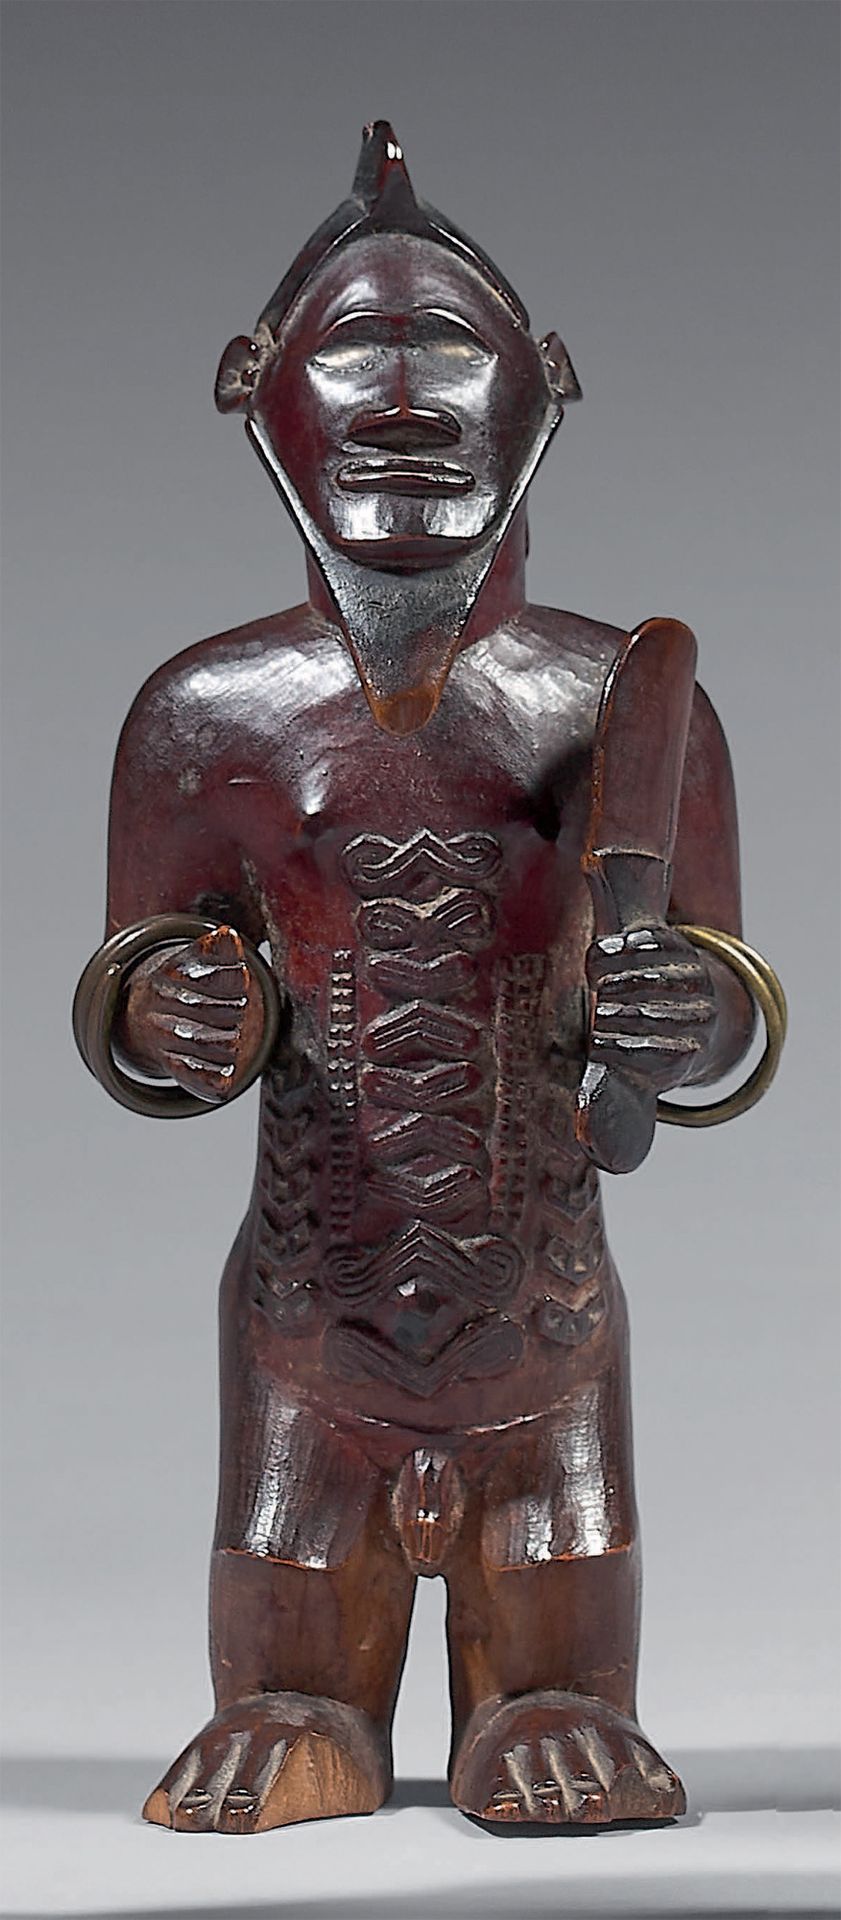 Null Bembe statuette (Congo)
The male figure with eyes inlaid with earthenware i&hellip;